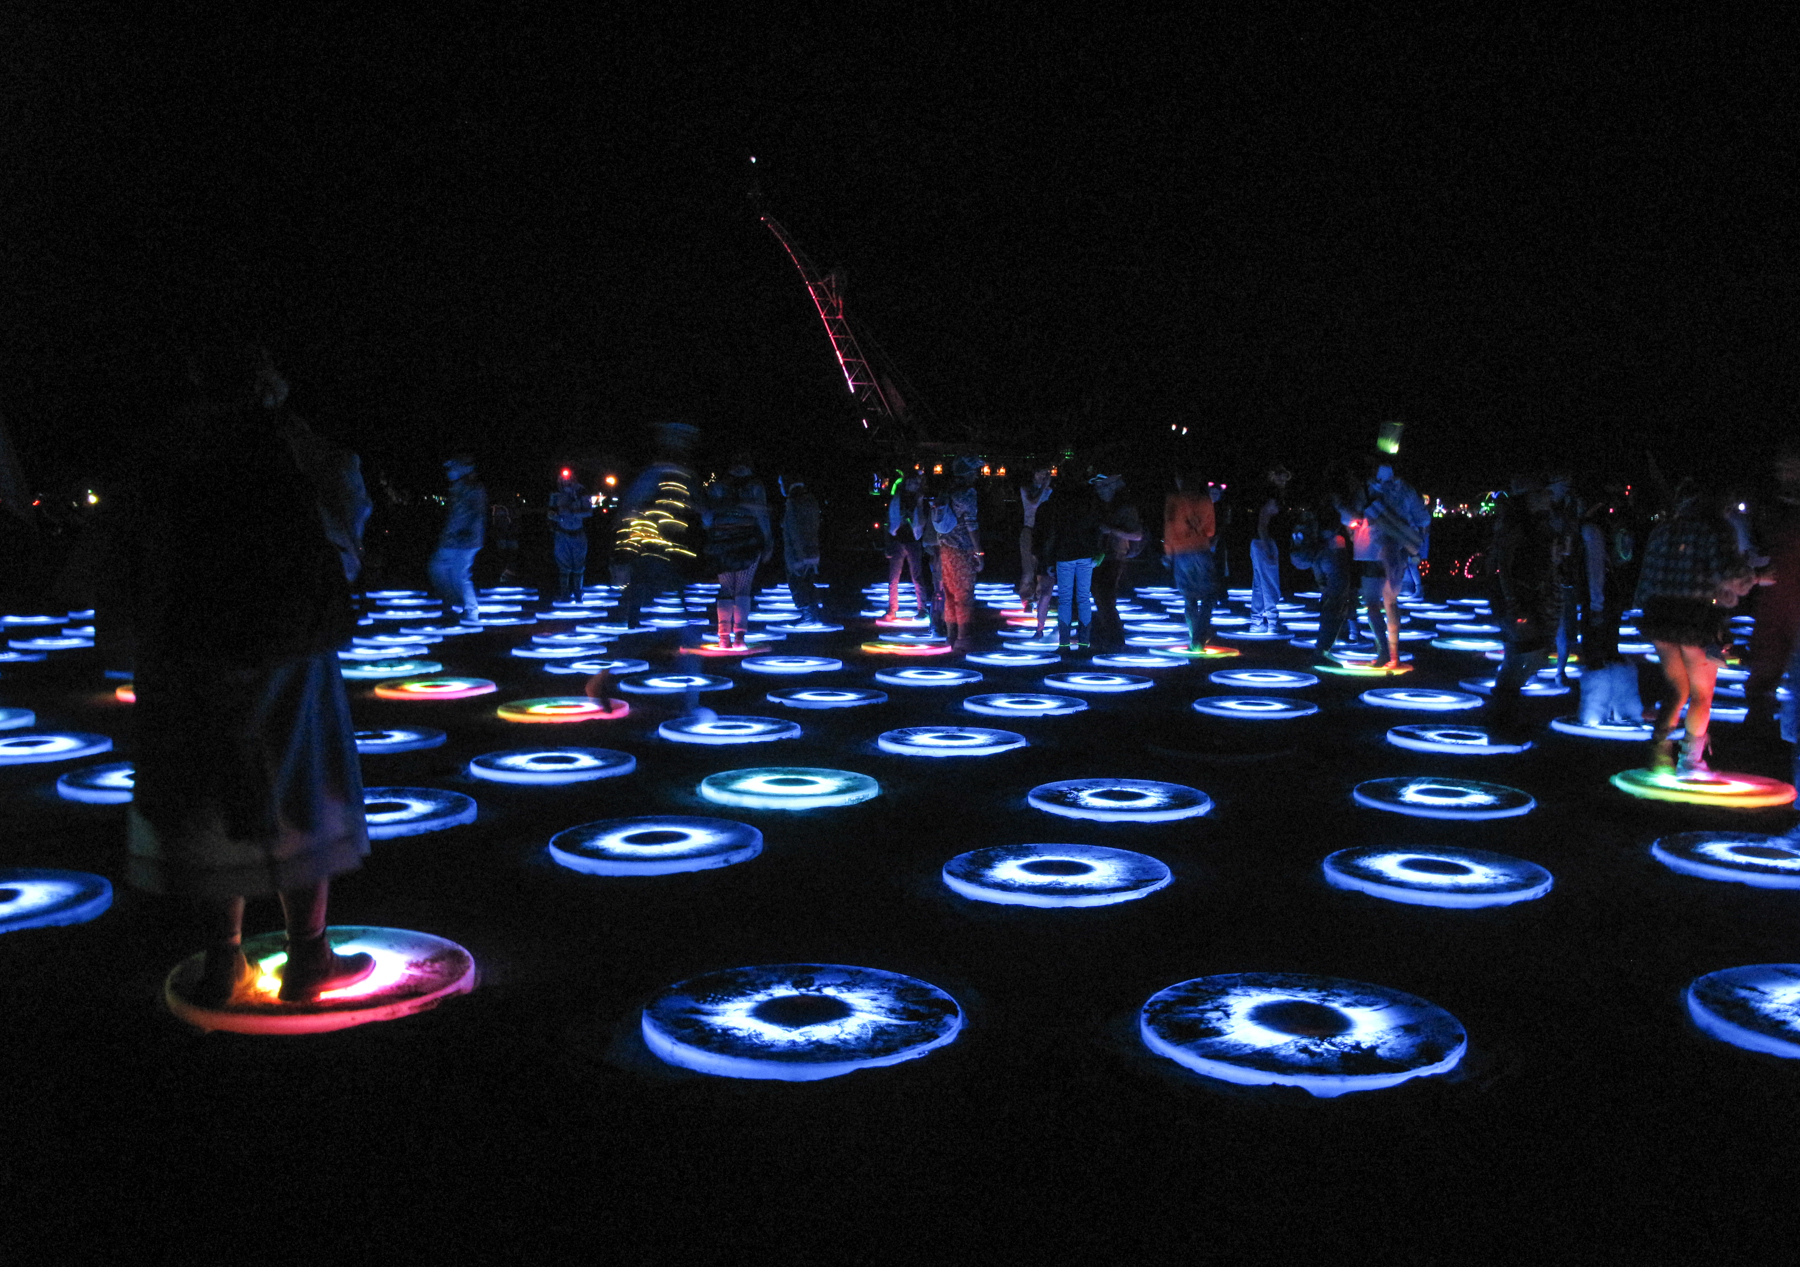 The Superpool: LED lilypads that lit up when you stepped on them. People were running around, laughing and screaming and I felt like were all about five years old again.